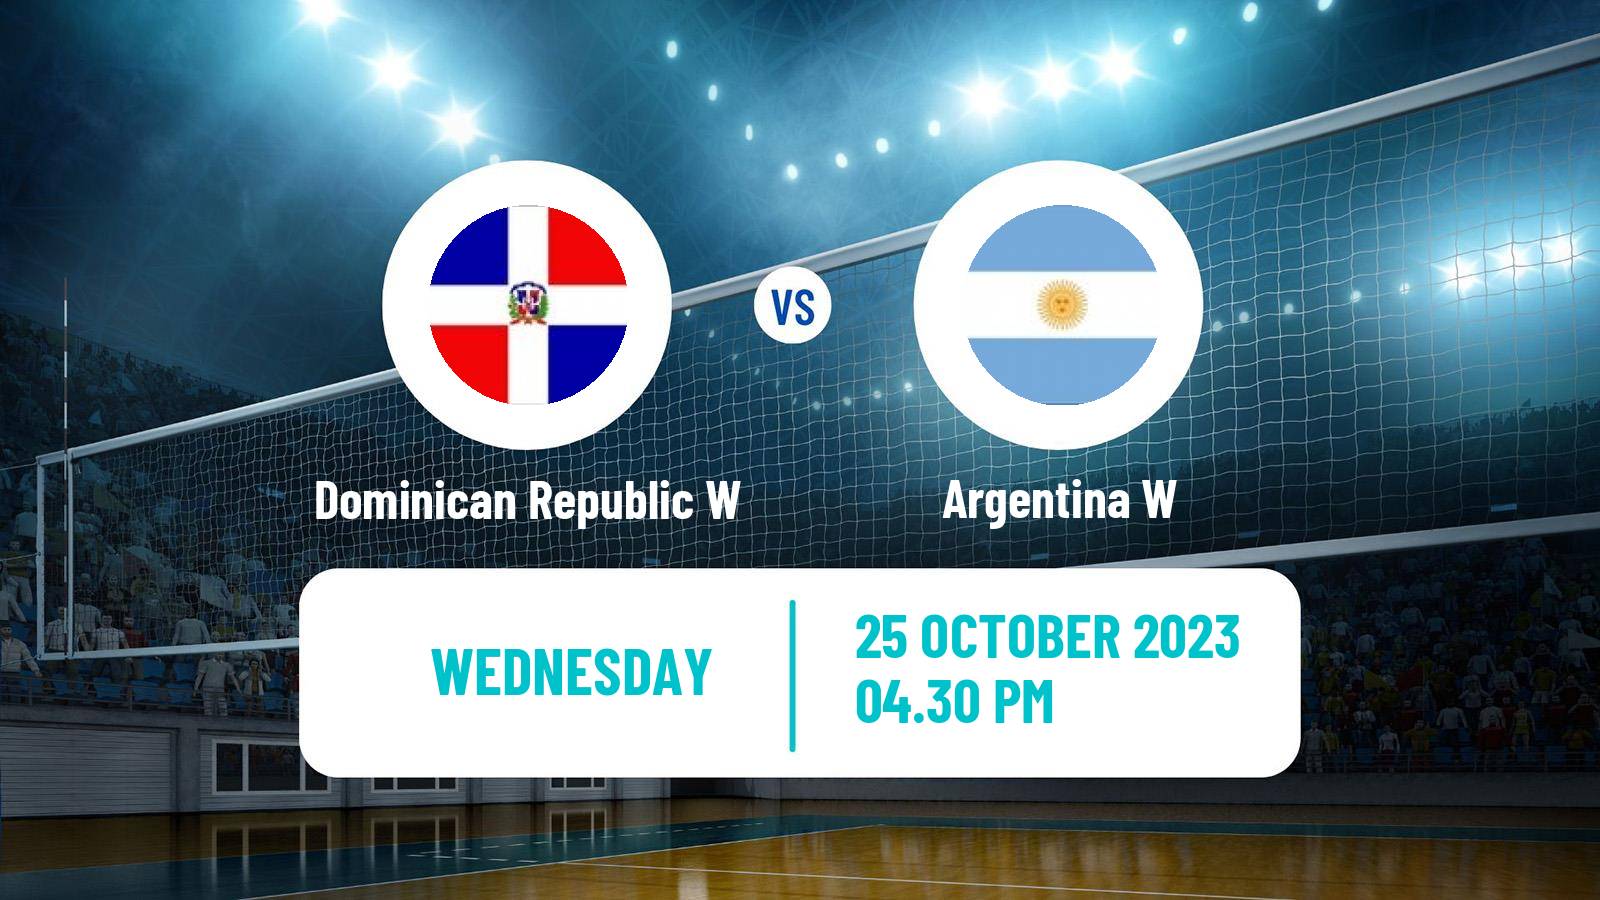 Volleyball Pan American Games Volleyball Women Dominican Republic W - Argentina W